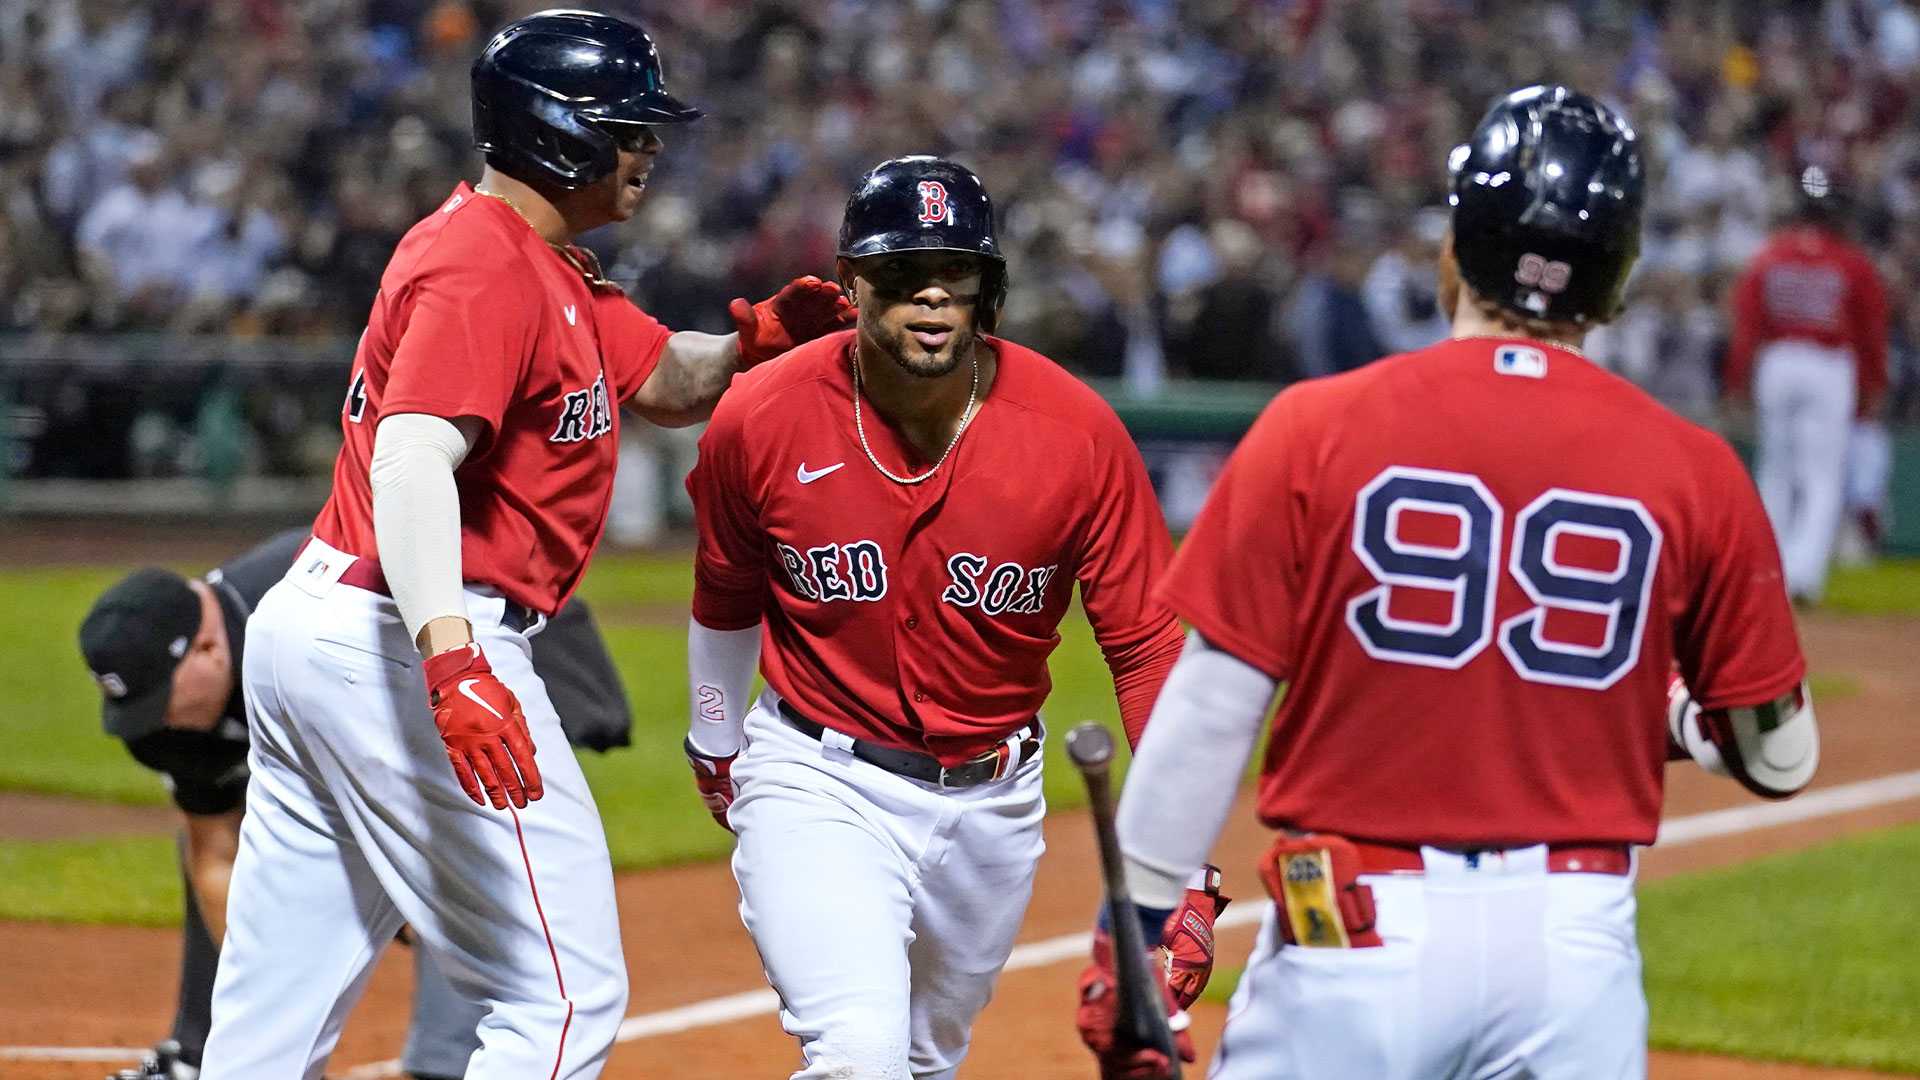 Red Sox defeat Yankees in AL Wild Card Game, advance to ALDS